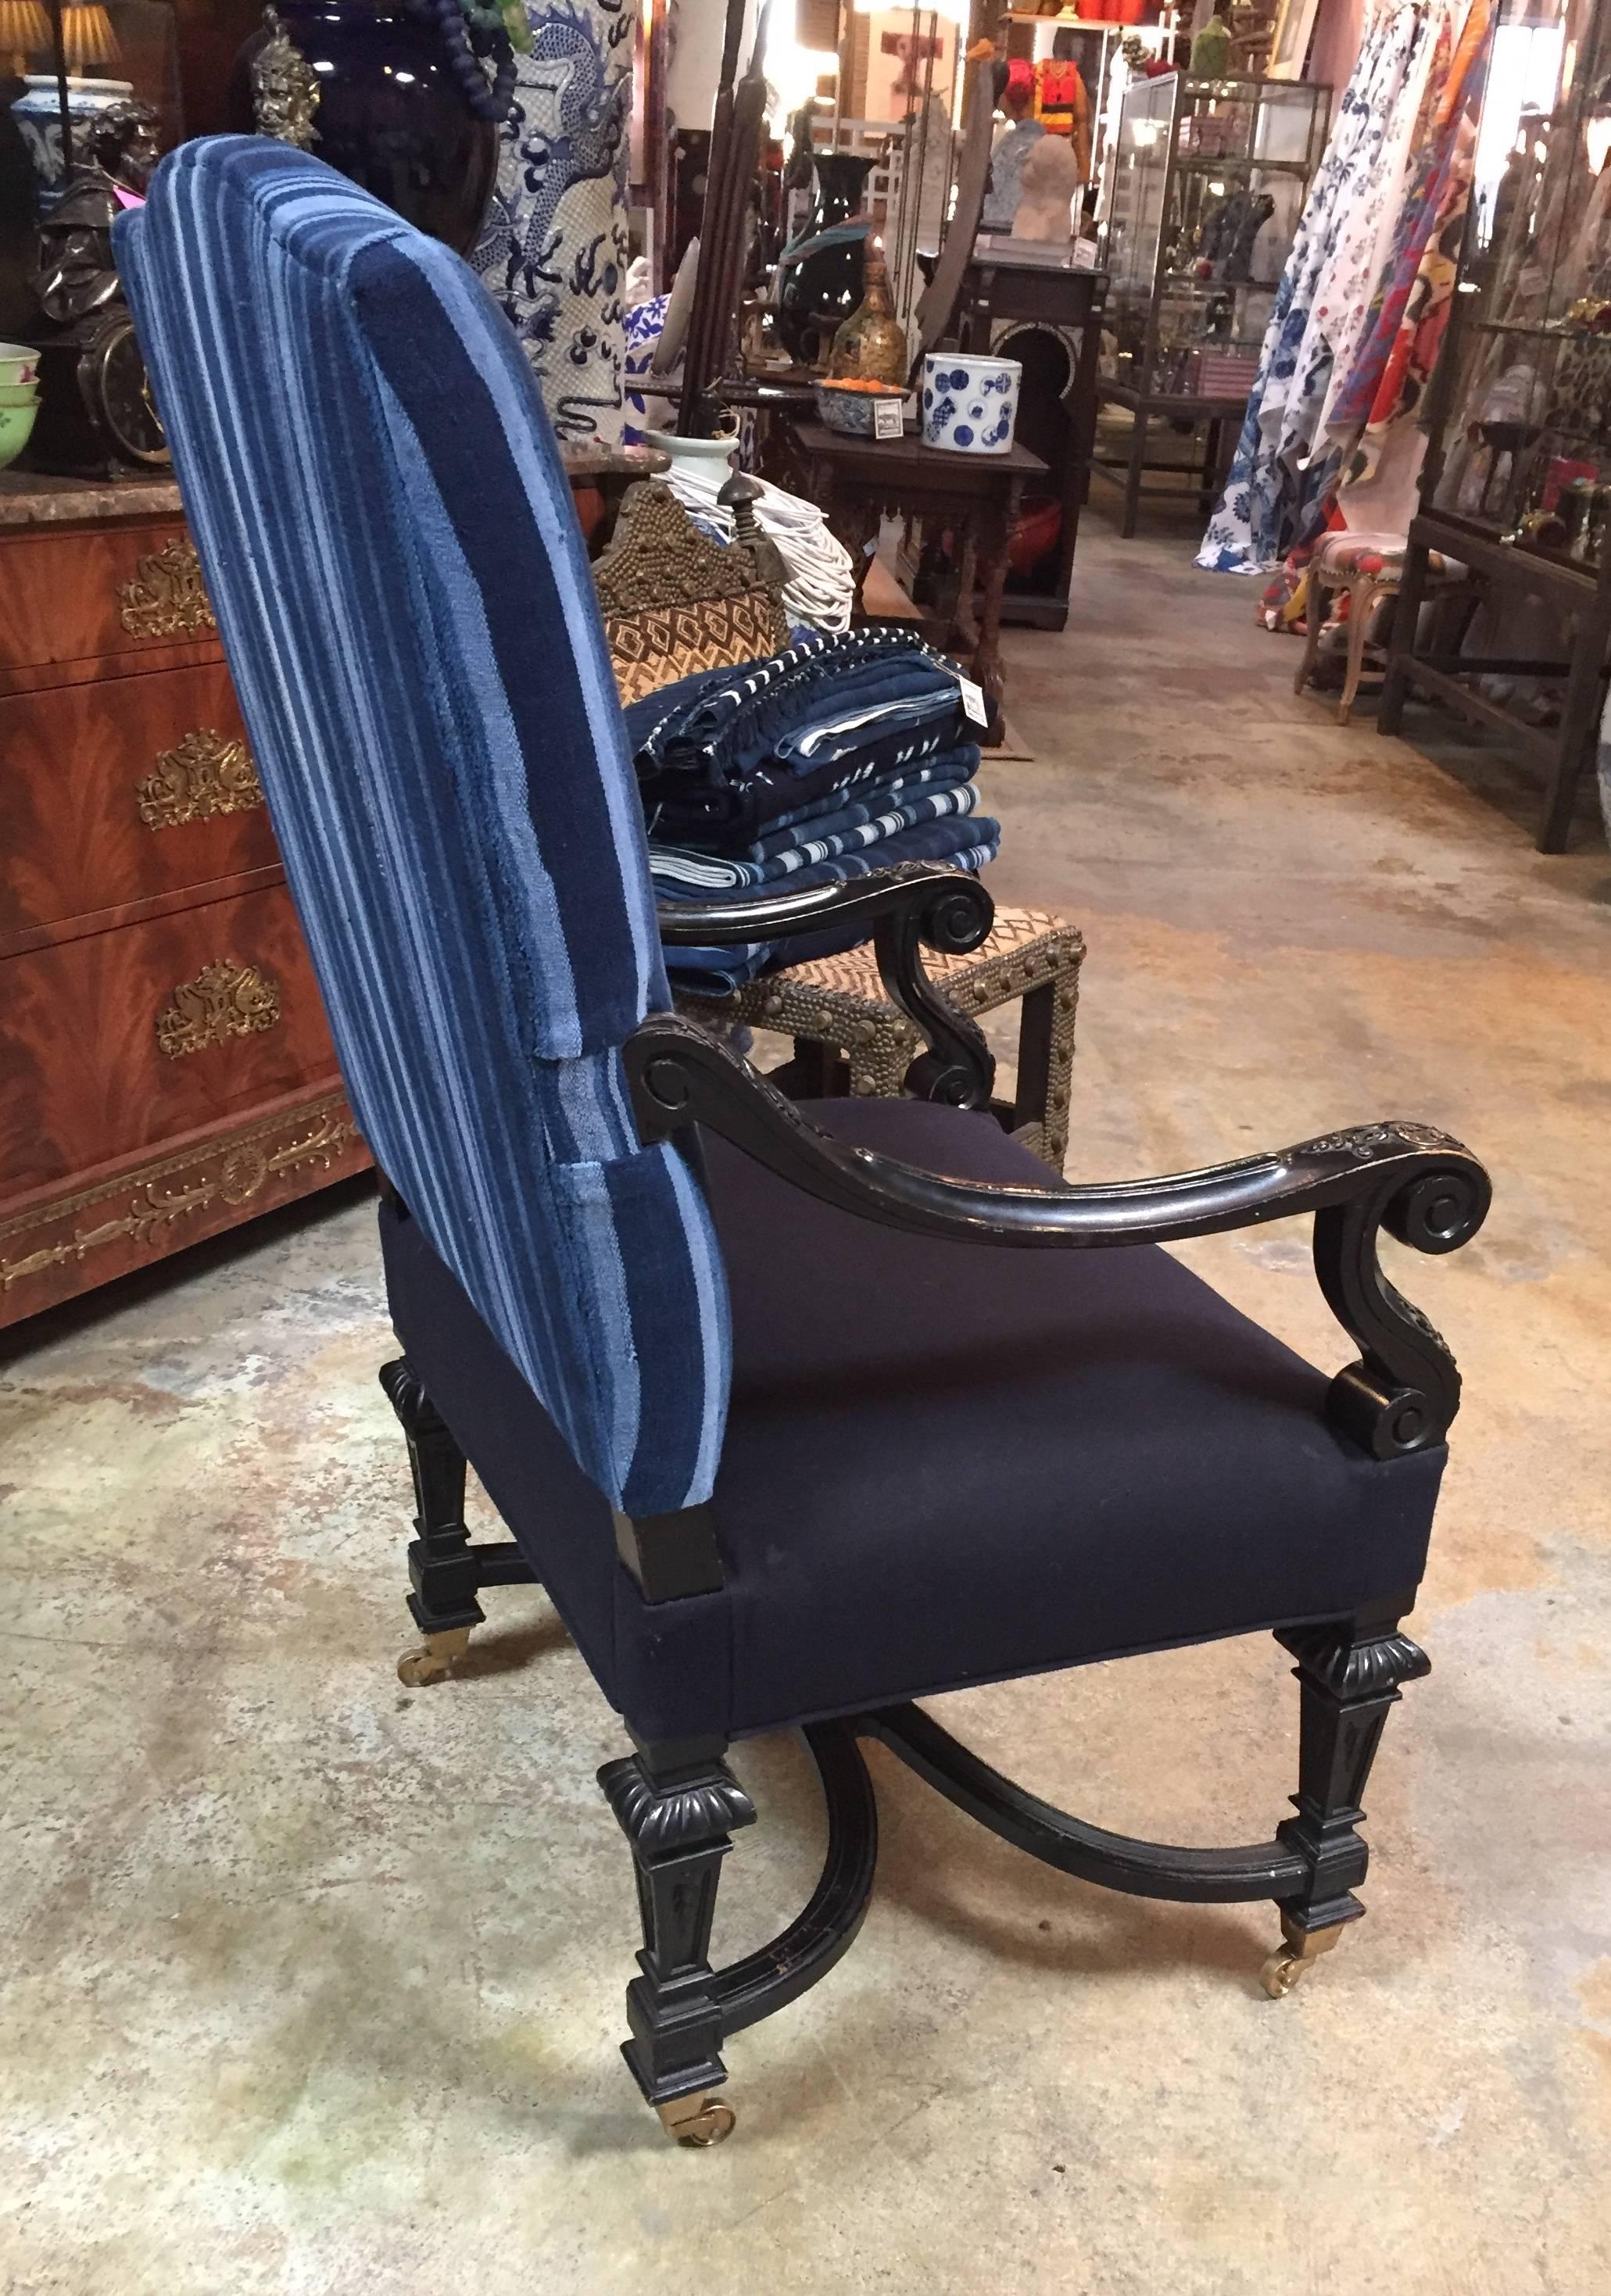 Pull up chair finished in black and upholstered inside and outside back in antique Indigo textile from, Africa.
Seat is covered in coordinating solid fabric.